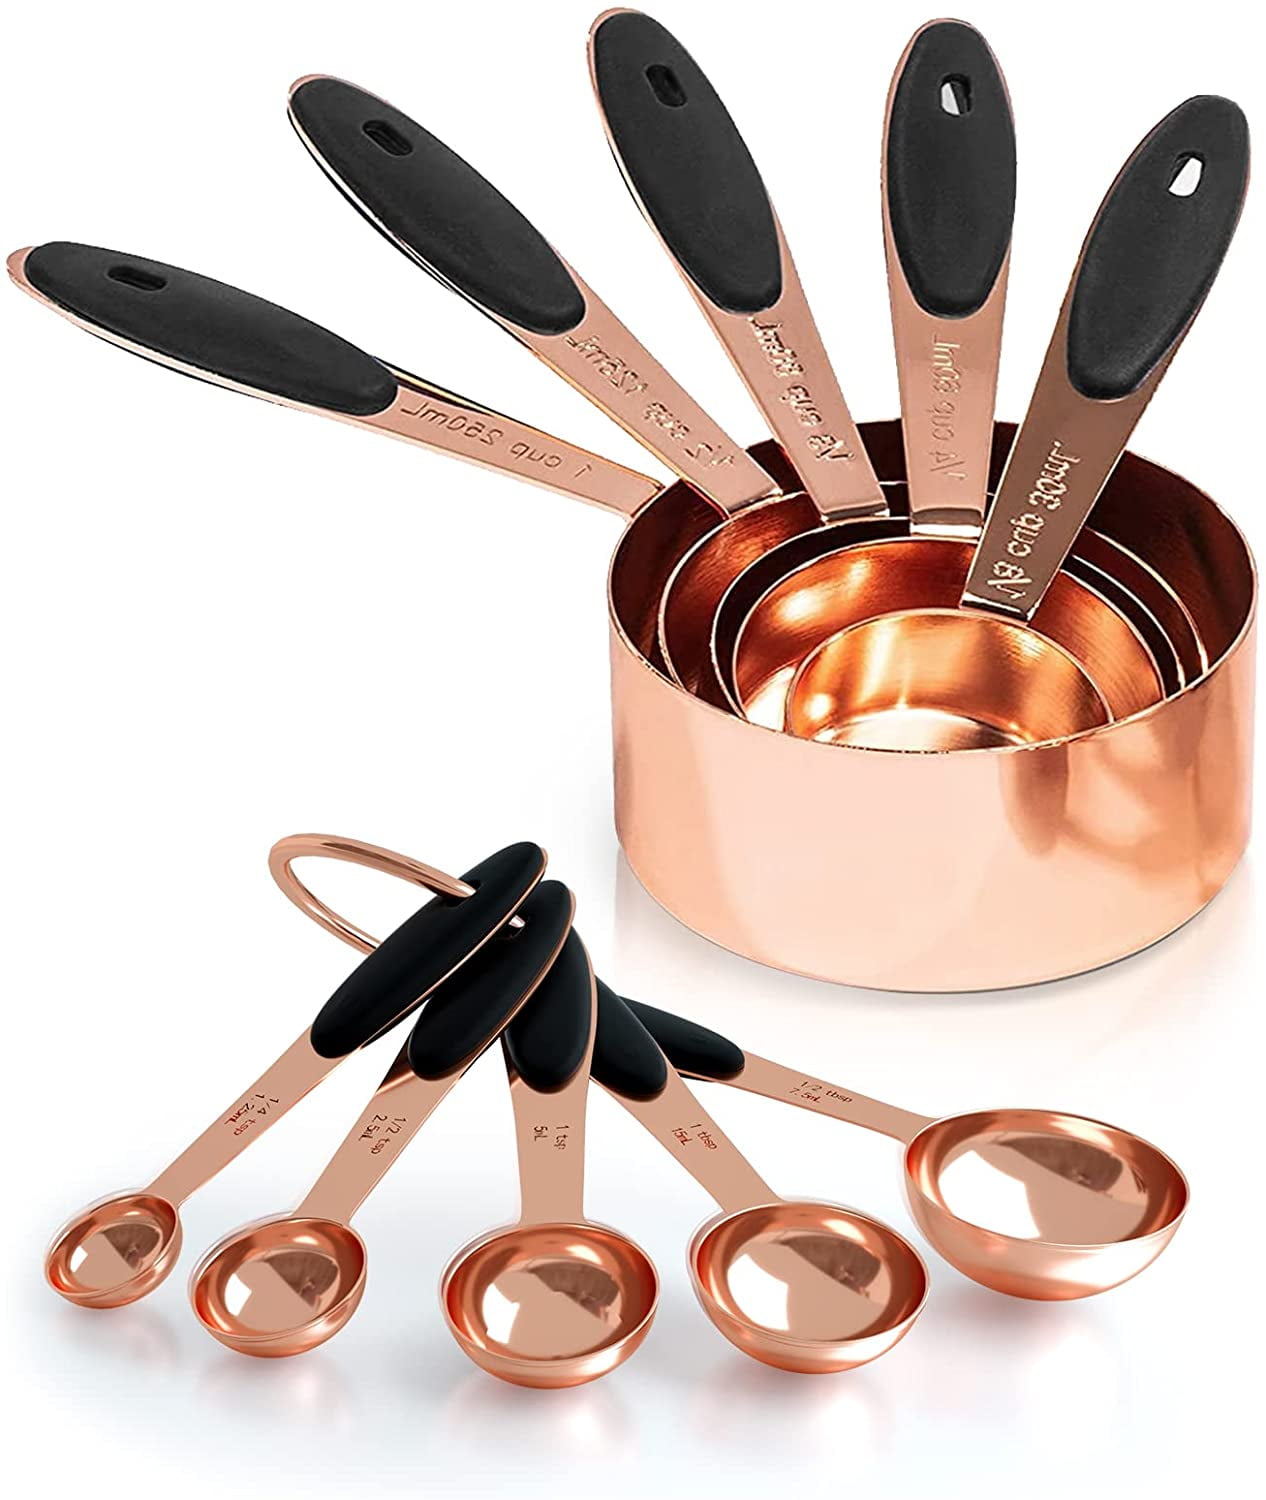 8 Pieces Measuring Cups and Spoons Set, nesting measuring cups for Measuring  Dry or Liquid Ingredients, Stainless Steel Handle, Kitchen Gadgets for  Cooking & Baking